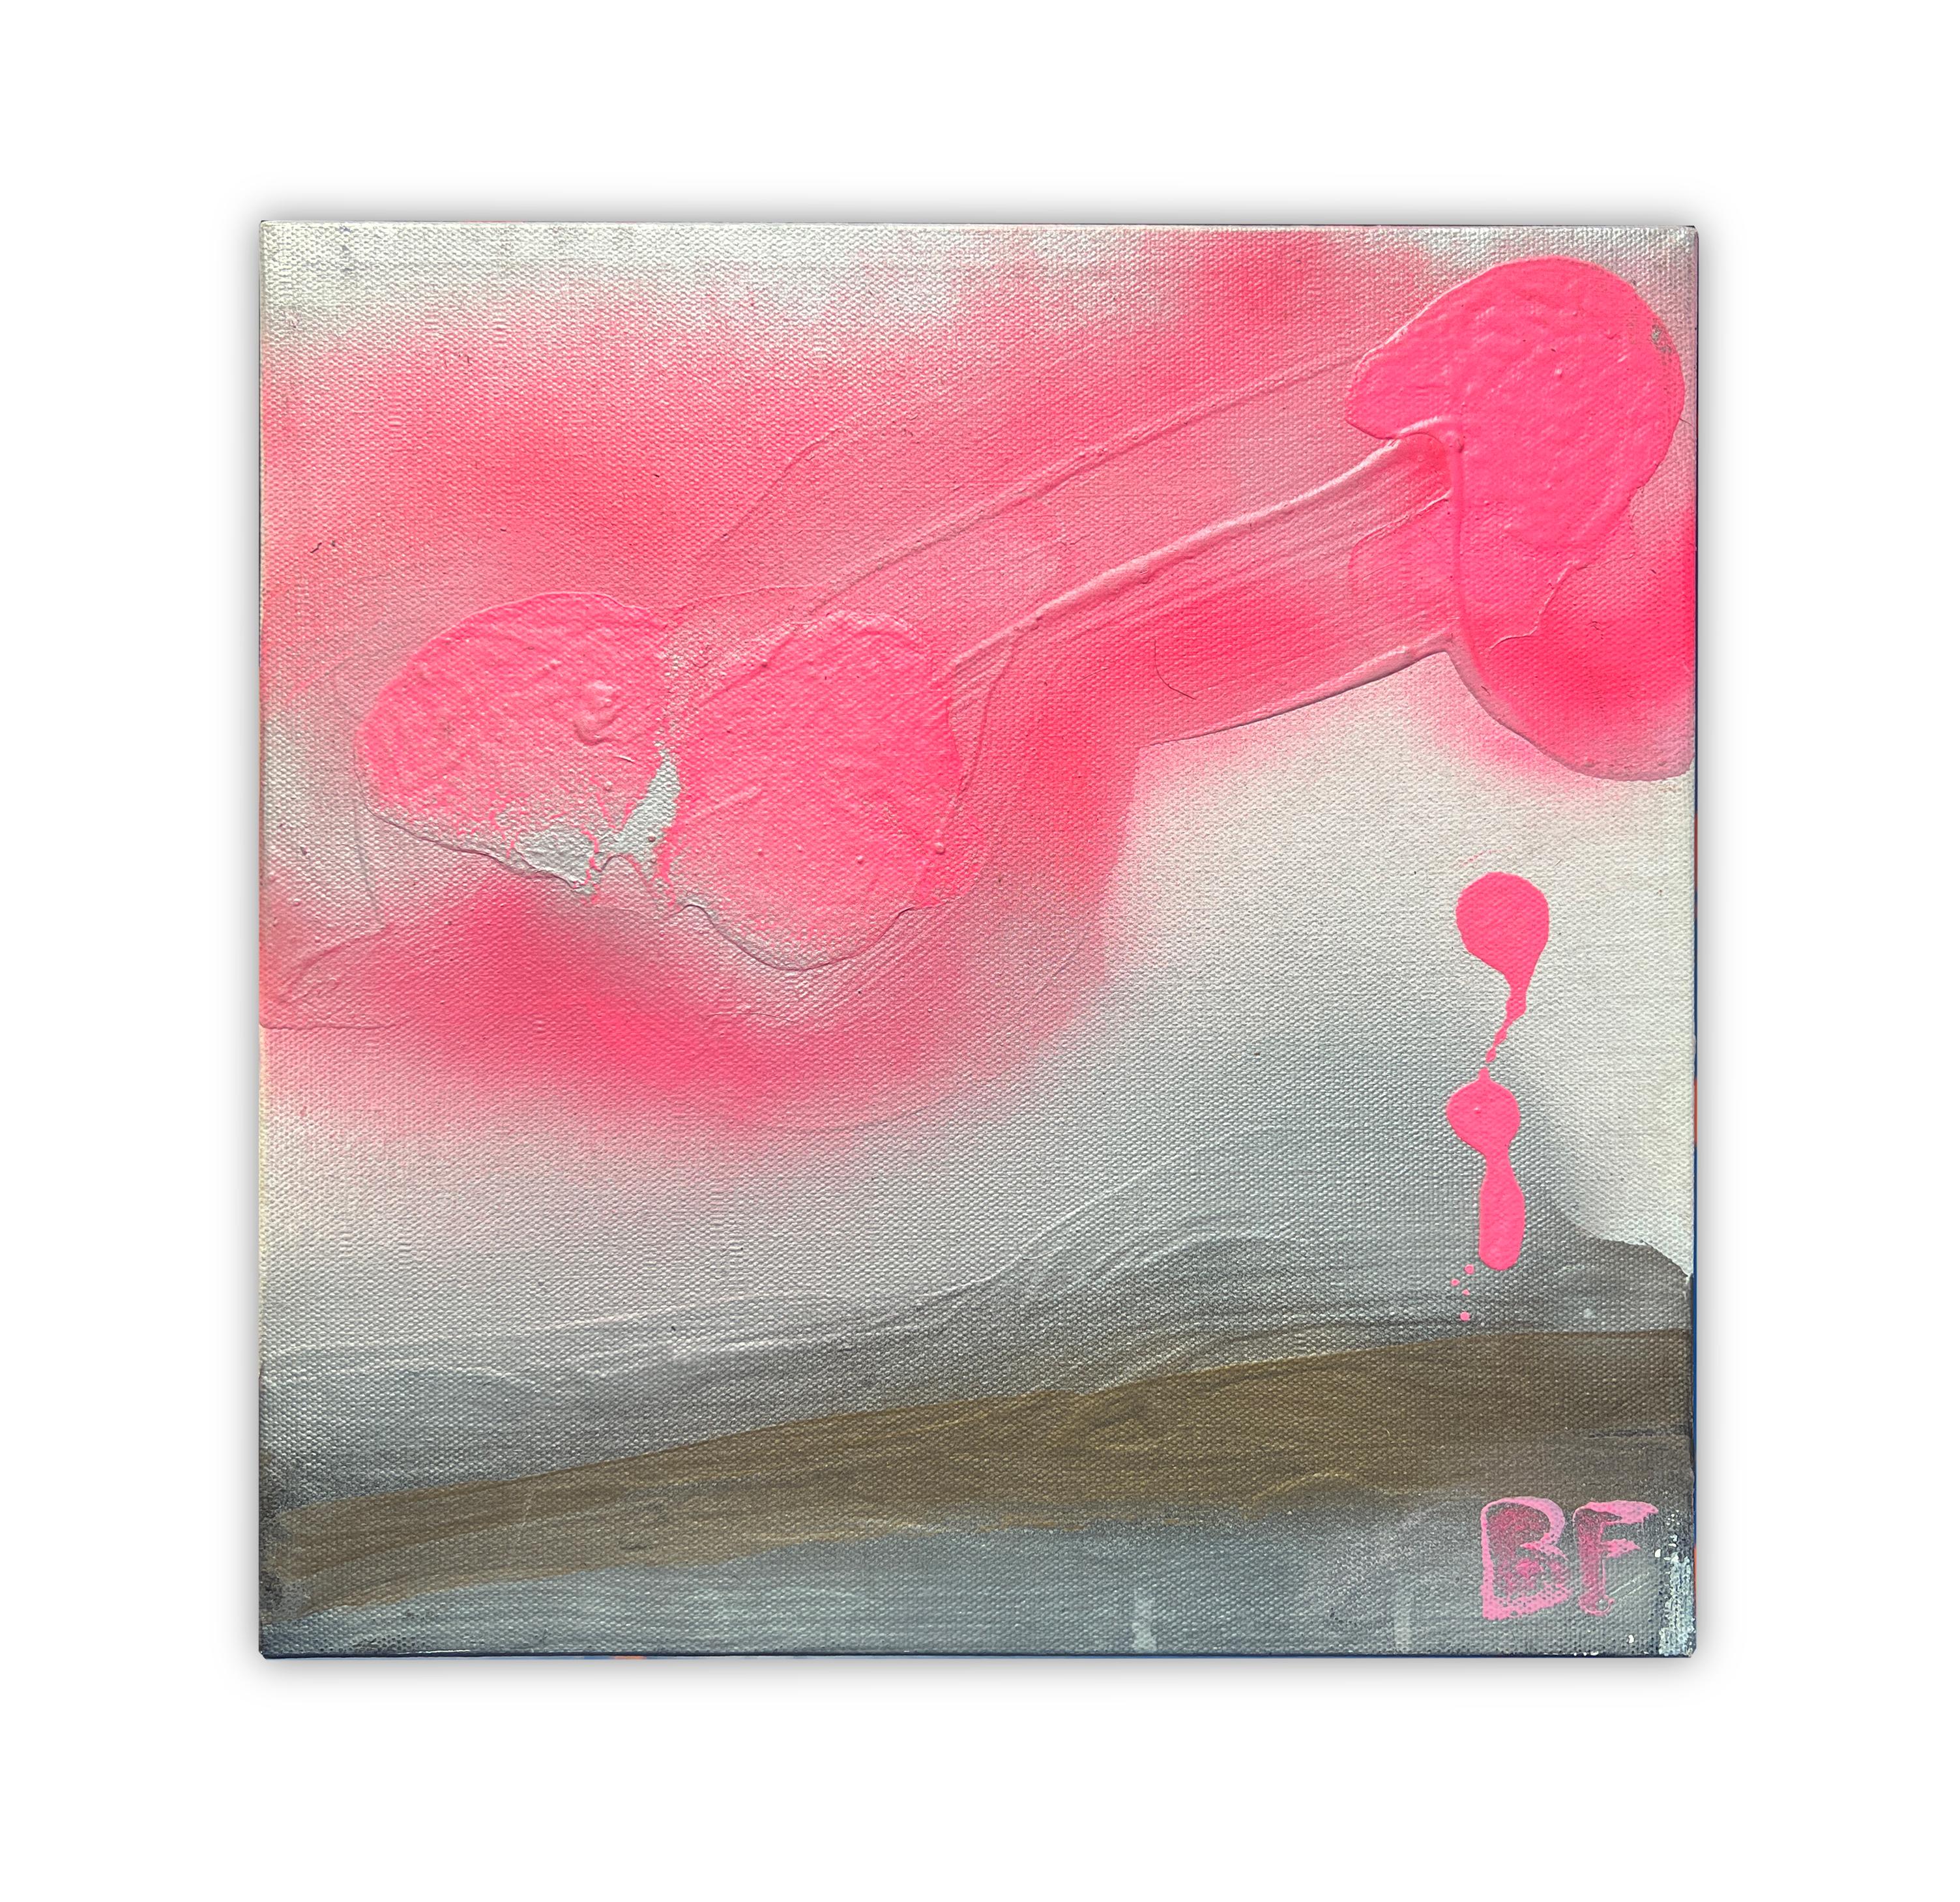 Little Pink Clouds I, by Brad Fisher 

Acrylic and day-glow spray paint on canvas

12 X 12 in.

Shipping is not included. See our shipping policies. Please contact us for shipping quotes and customization options. 


All sales are final.